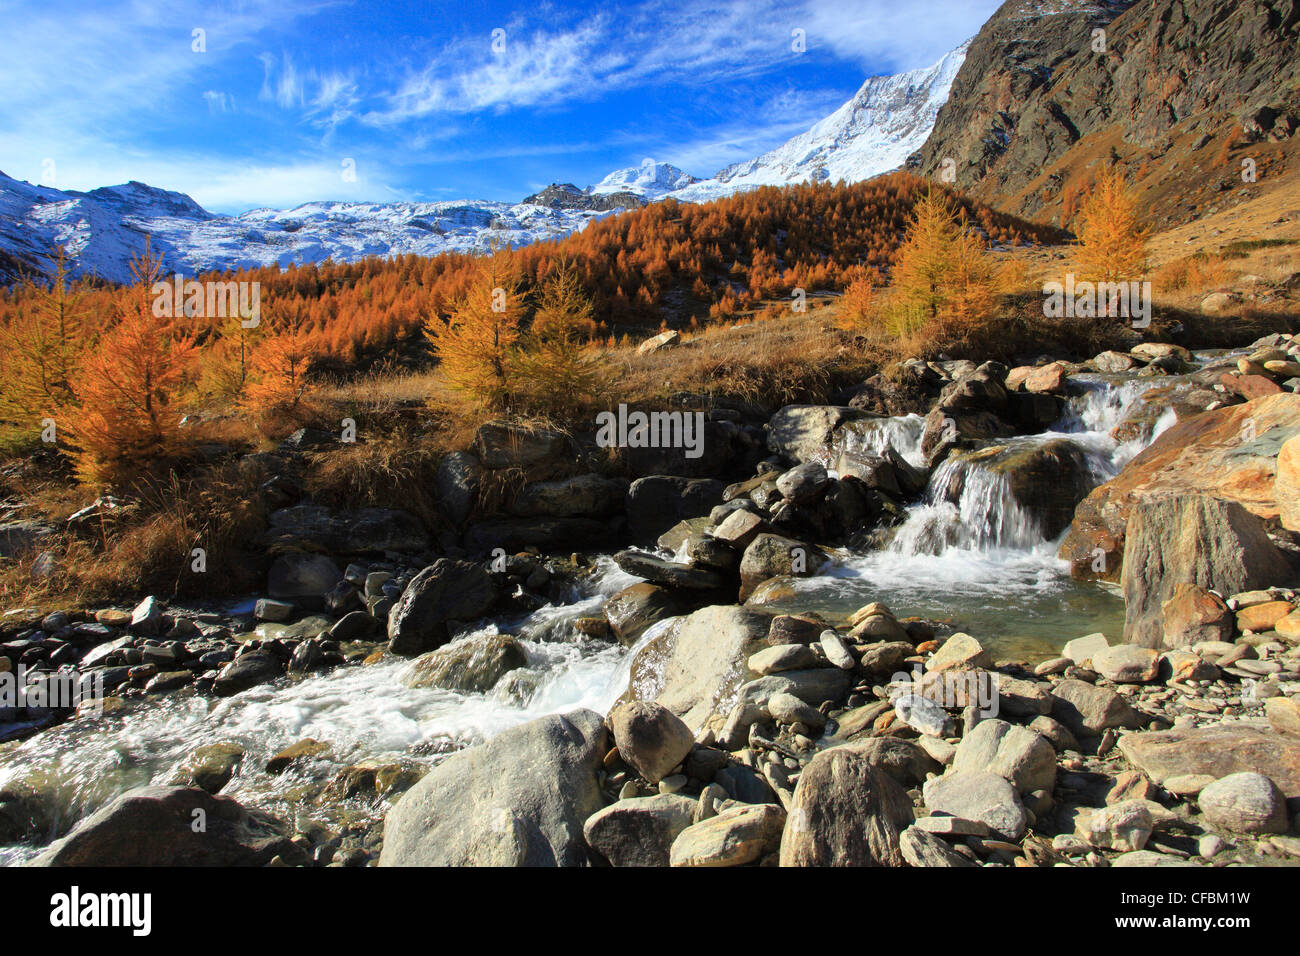 Alphubel, riverbed, autumn, colors, larch, larches, larch wood, Saas Fee, valley of Saas, sunshine, valley, Valais, Switzerland, Stock Photo